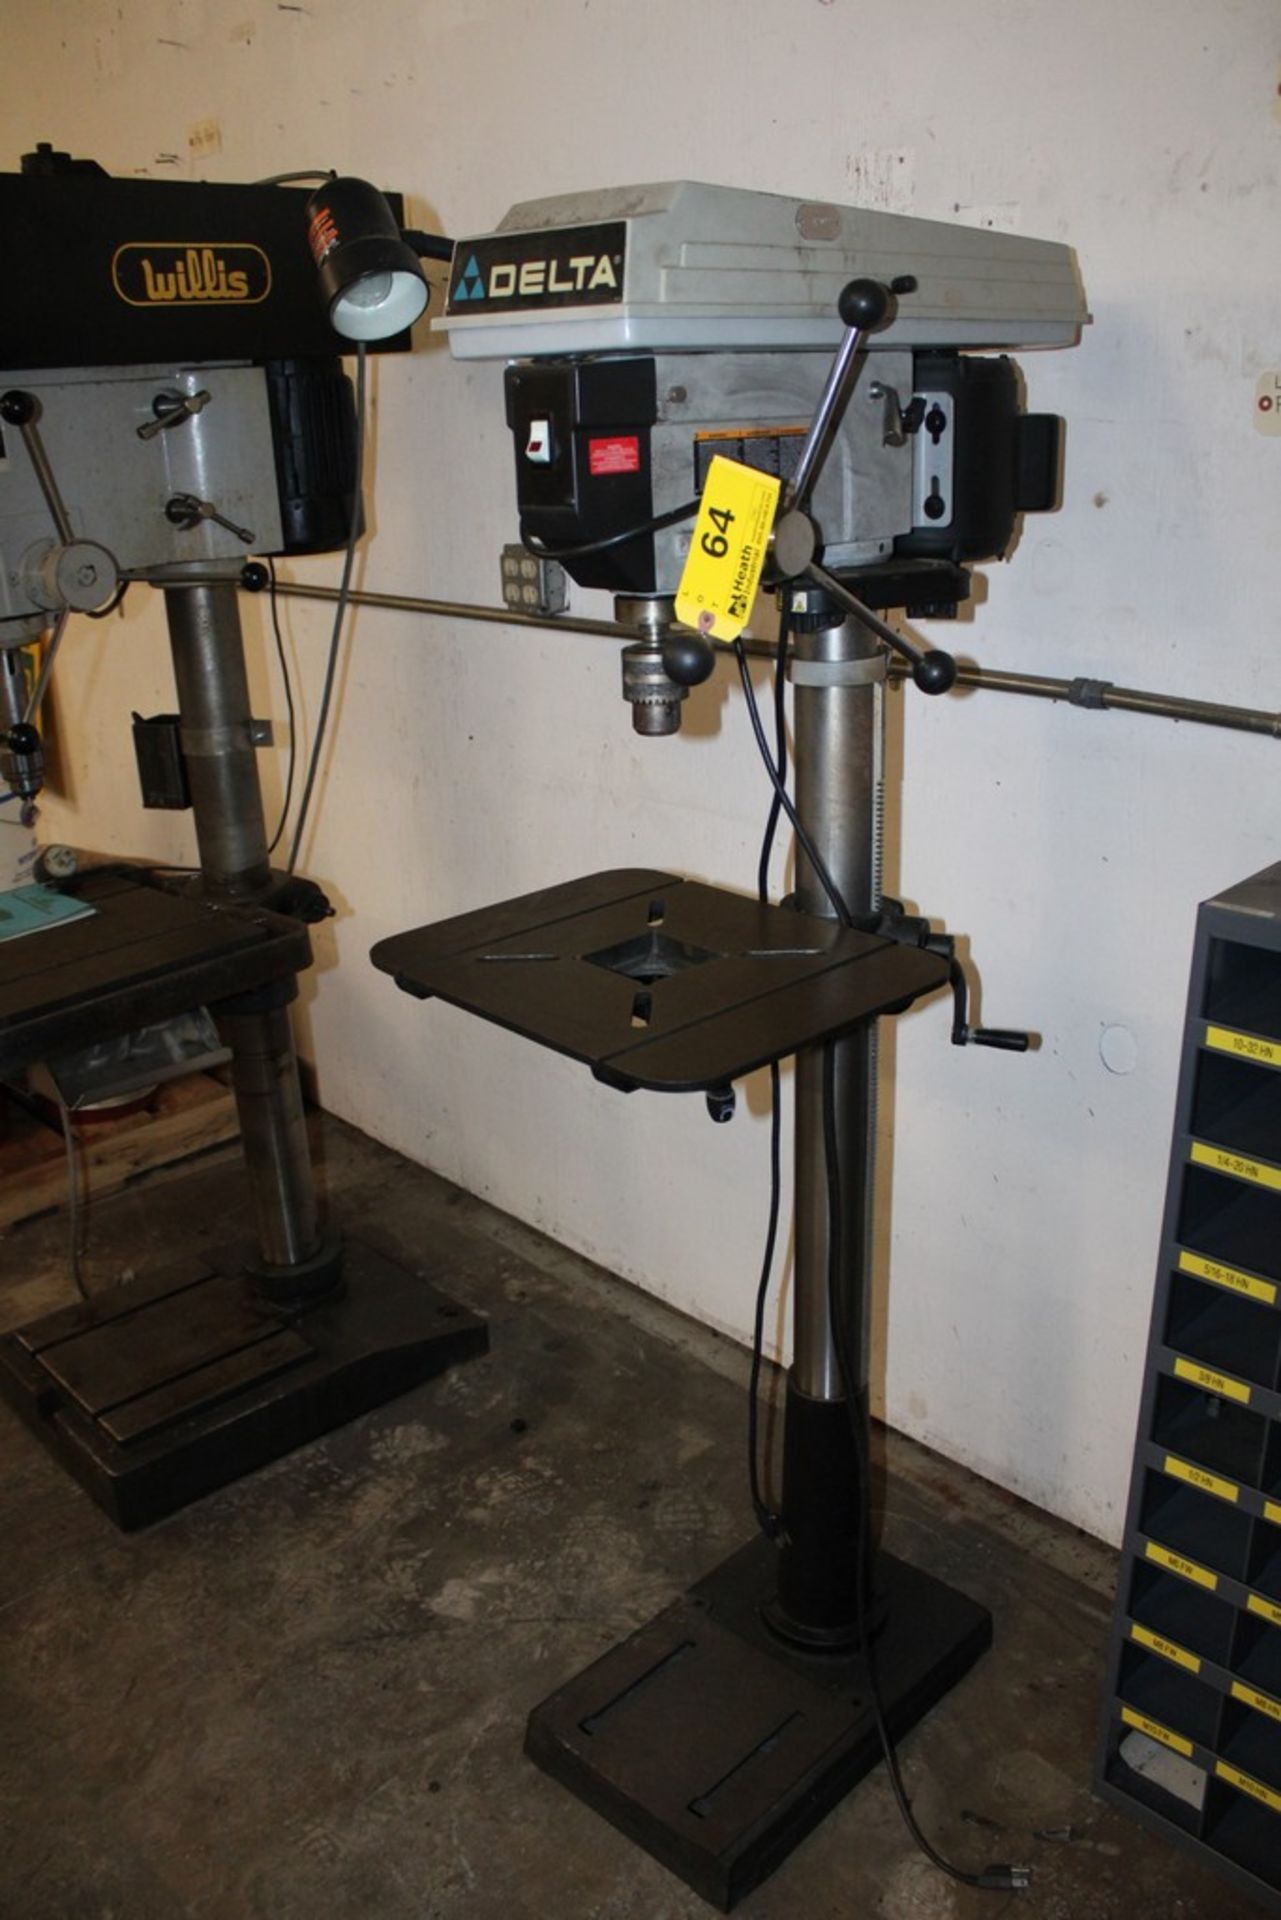 DELTA MODEL 17-950L 16-1/2" FLOOR STANDING DRILL PRESS, 14" X 18" SLOTTED TABLE, WORK LIGHT - Image 4 of 5